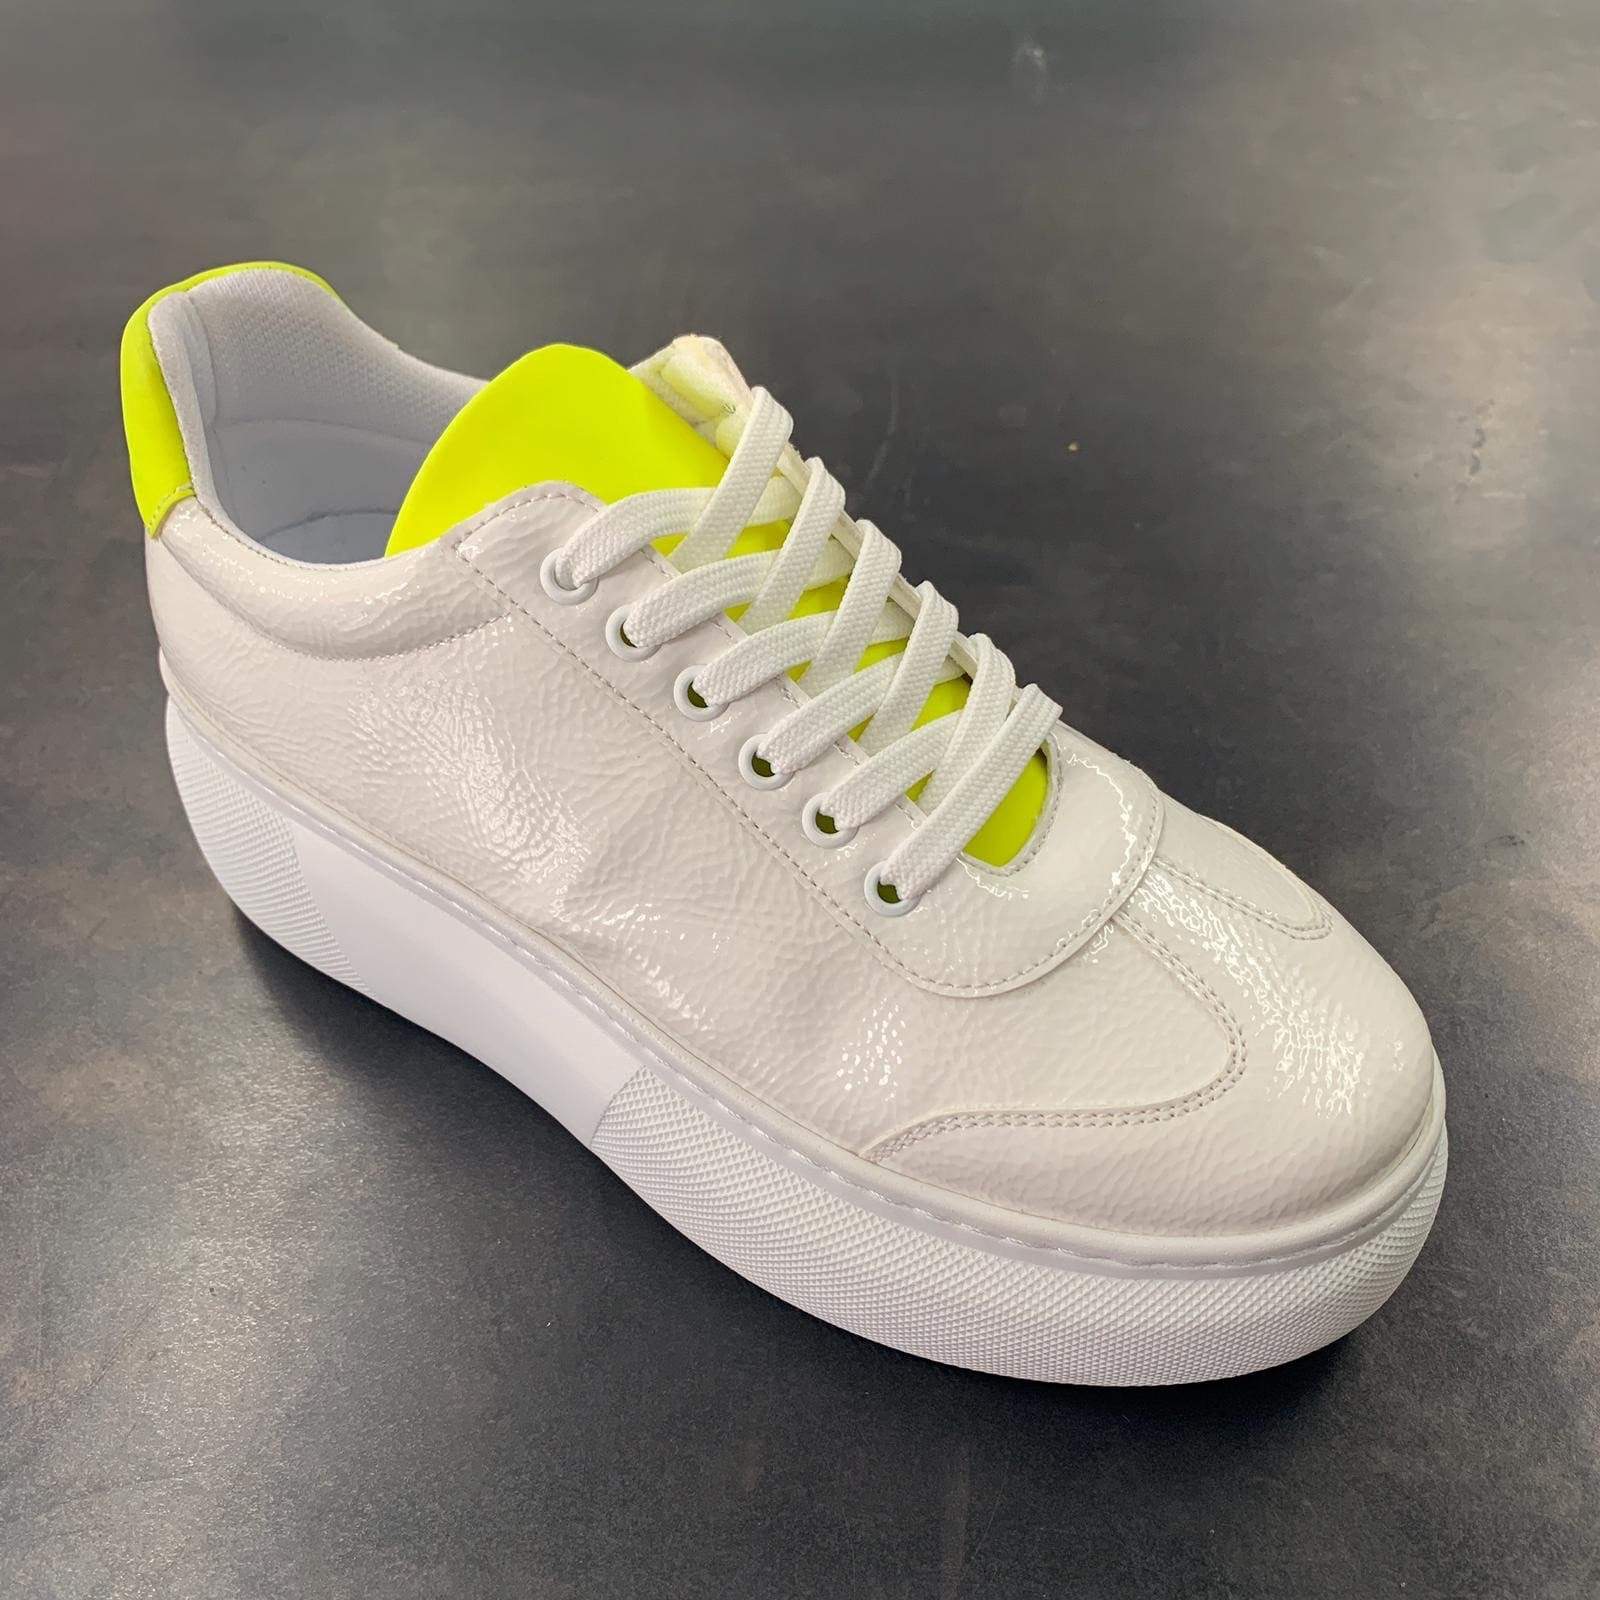 Rebel Groove Shoes Platform White Neon Yellow Sneakers